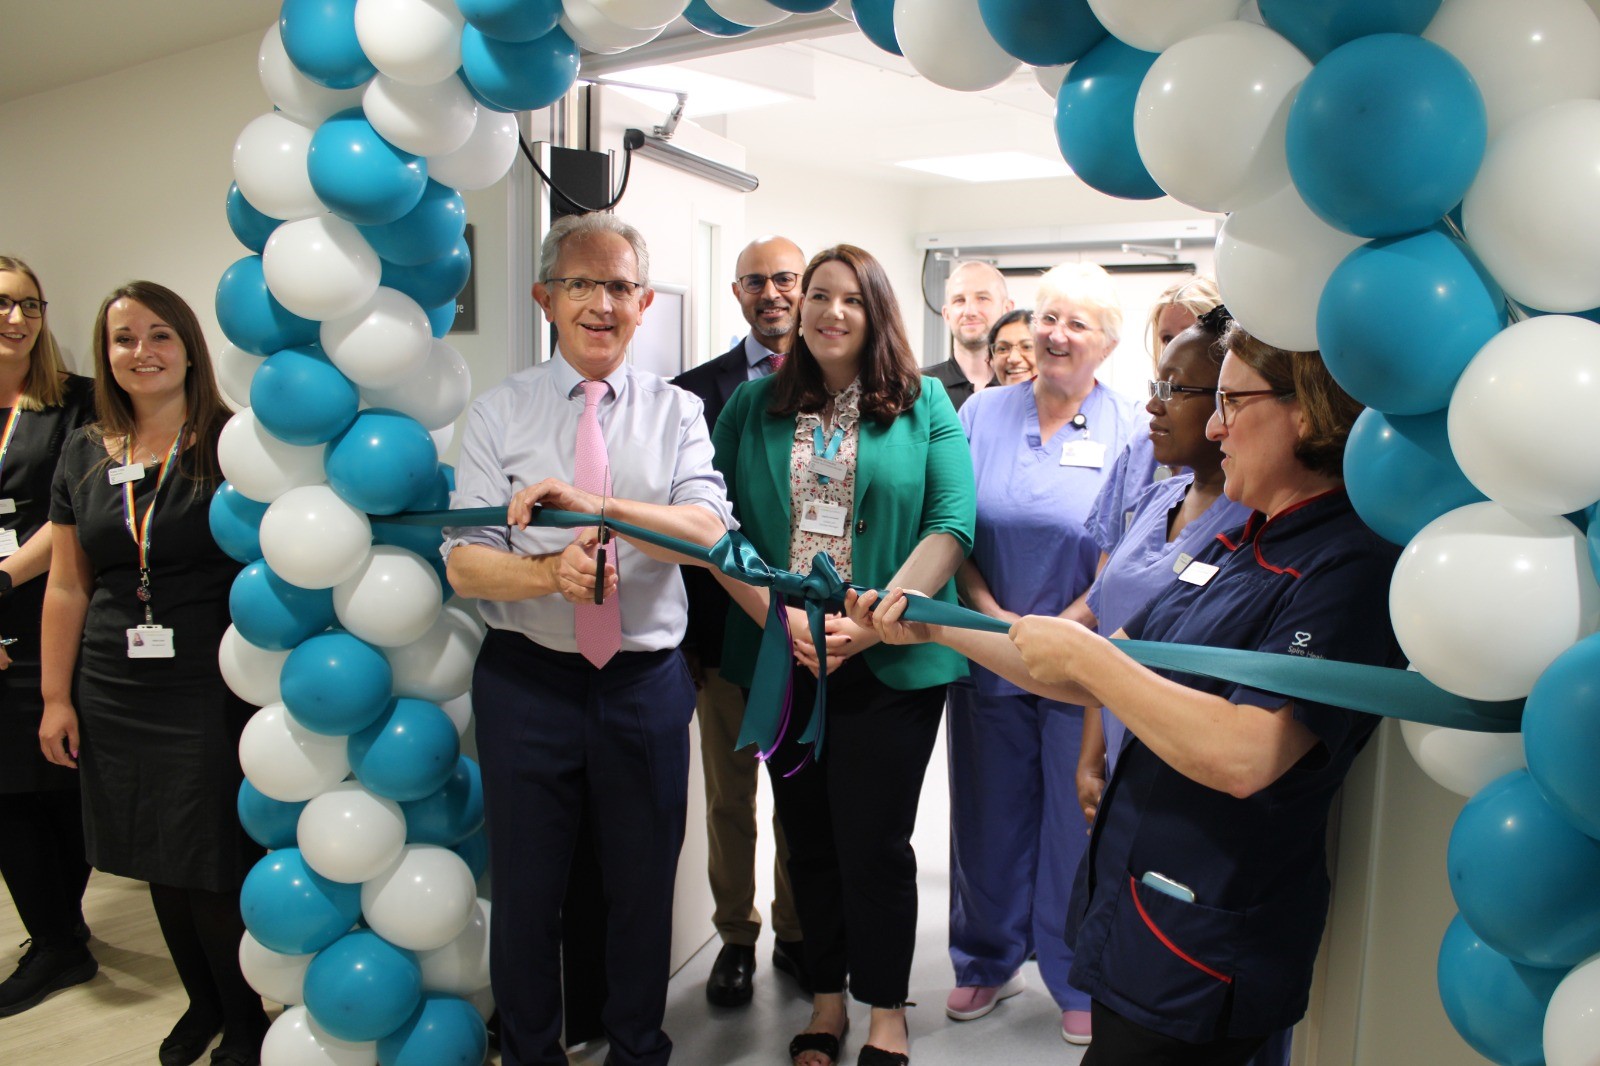 Spire Healthcare’s largest ophthalmology suite opened at Spire Cambridge Lea Hospital